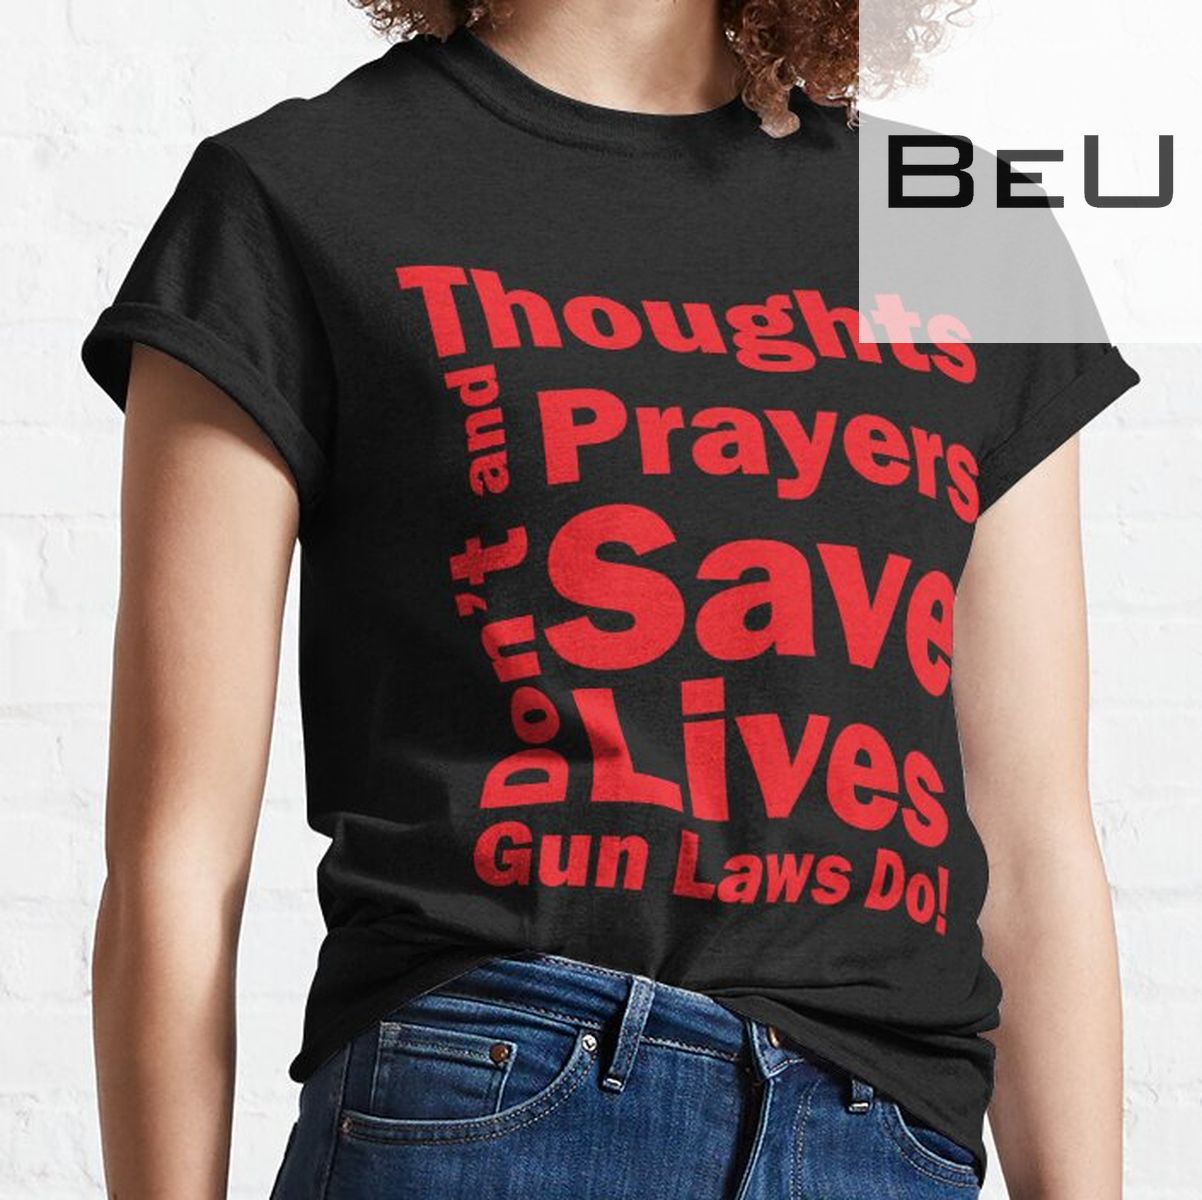 Thoughts And Prayers Don't Save Lives (Red Text) T-shirt